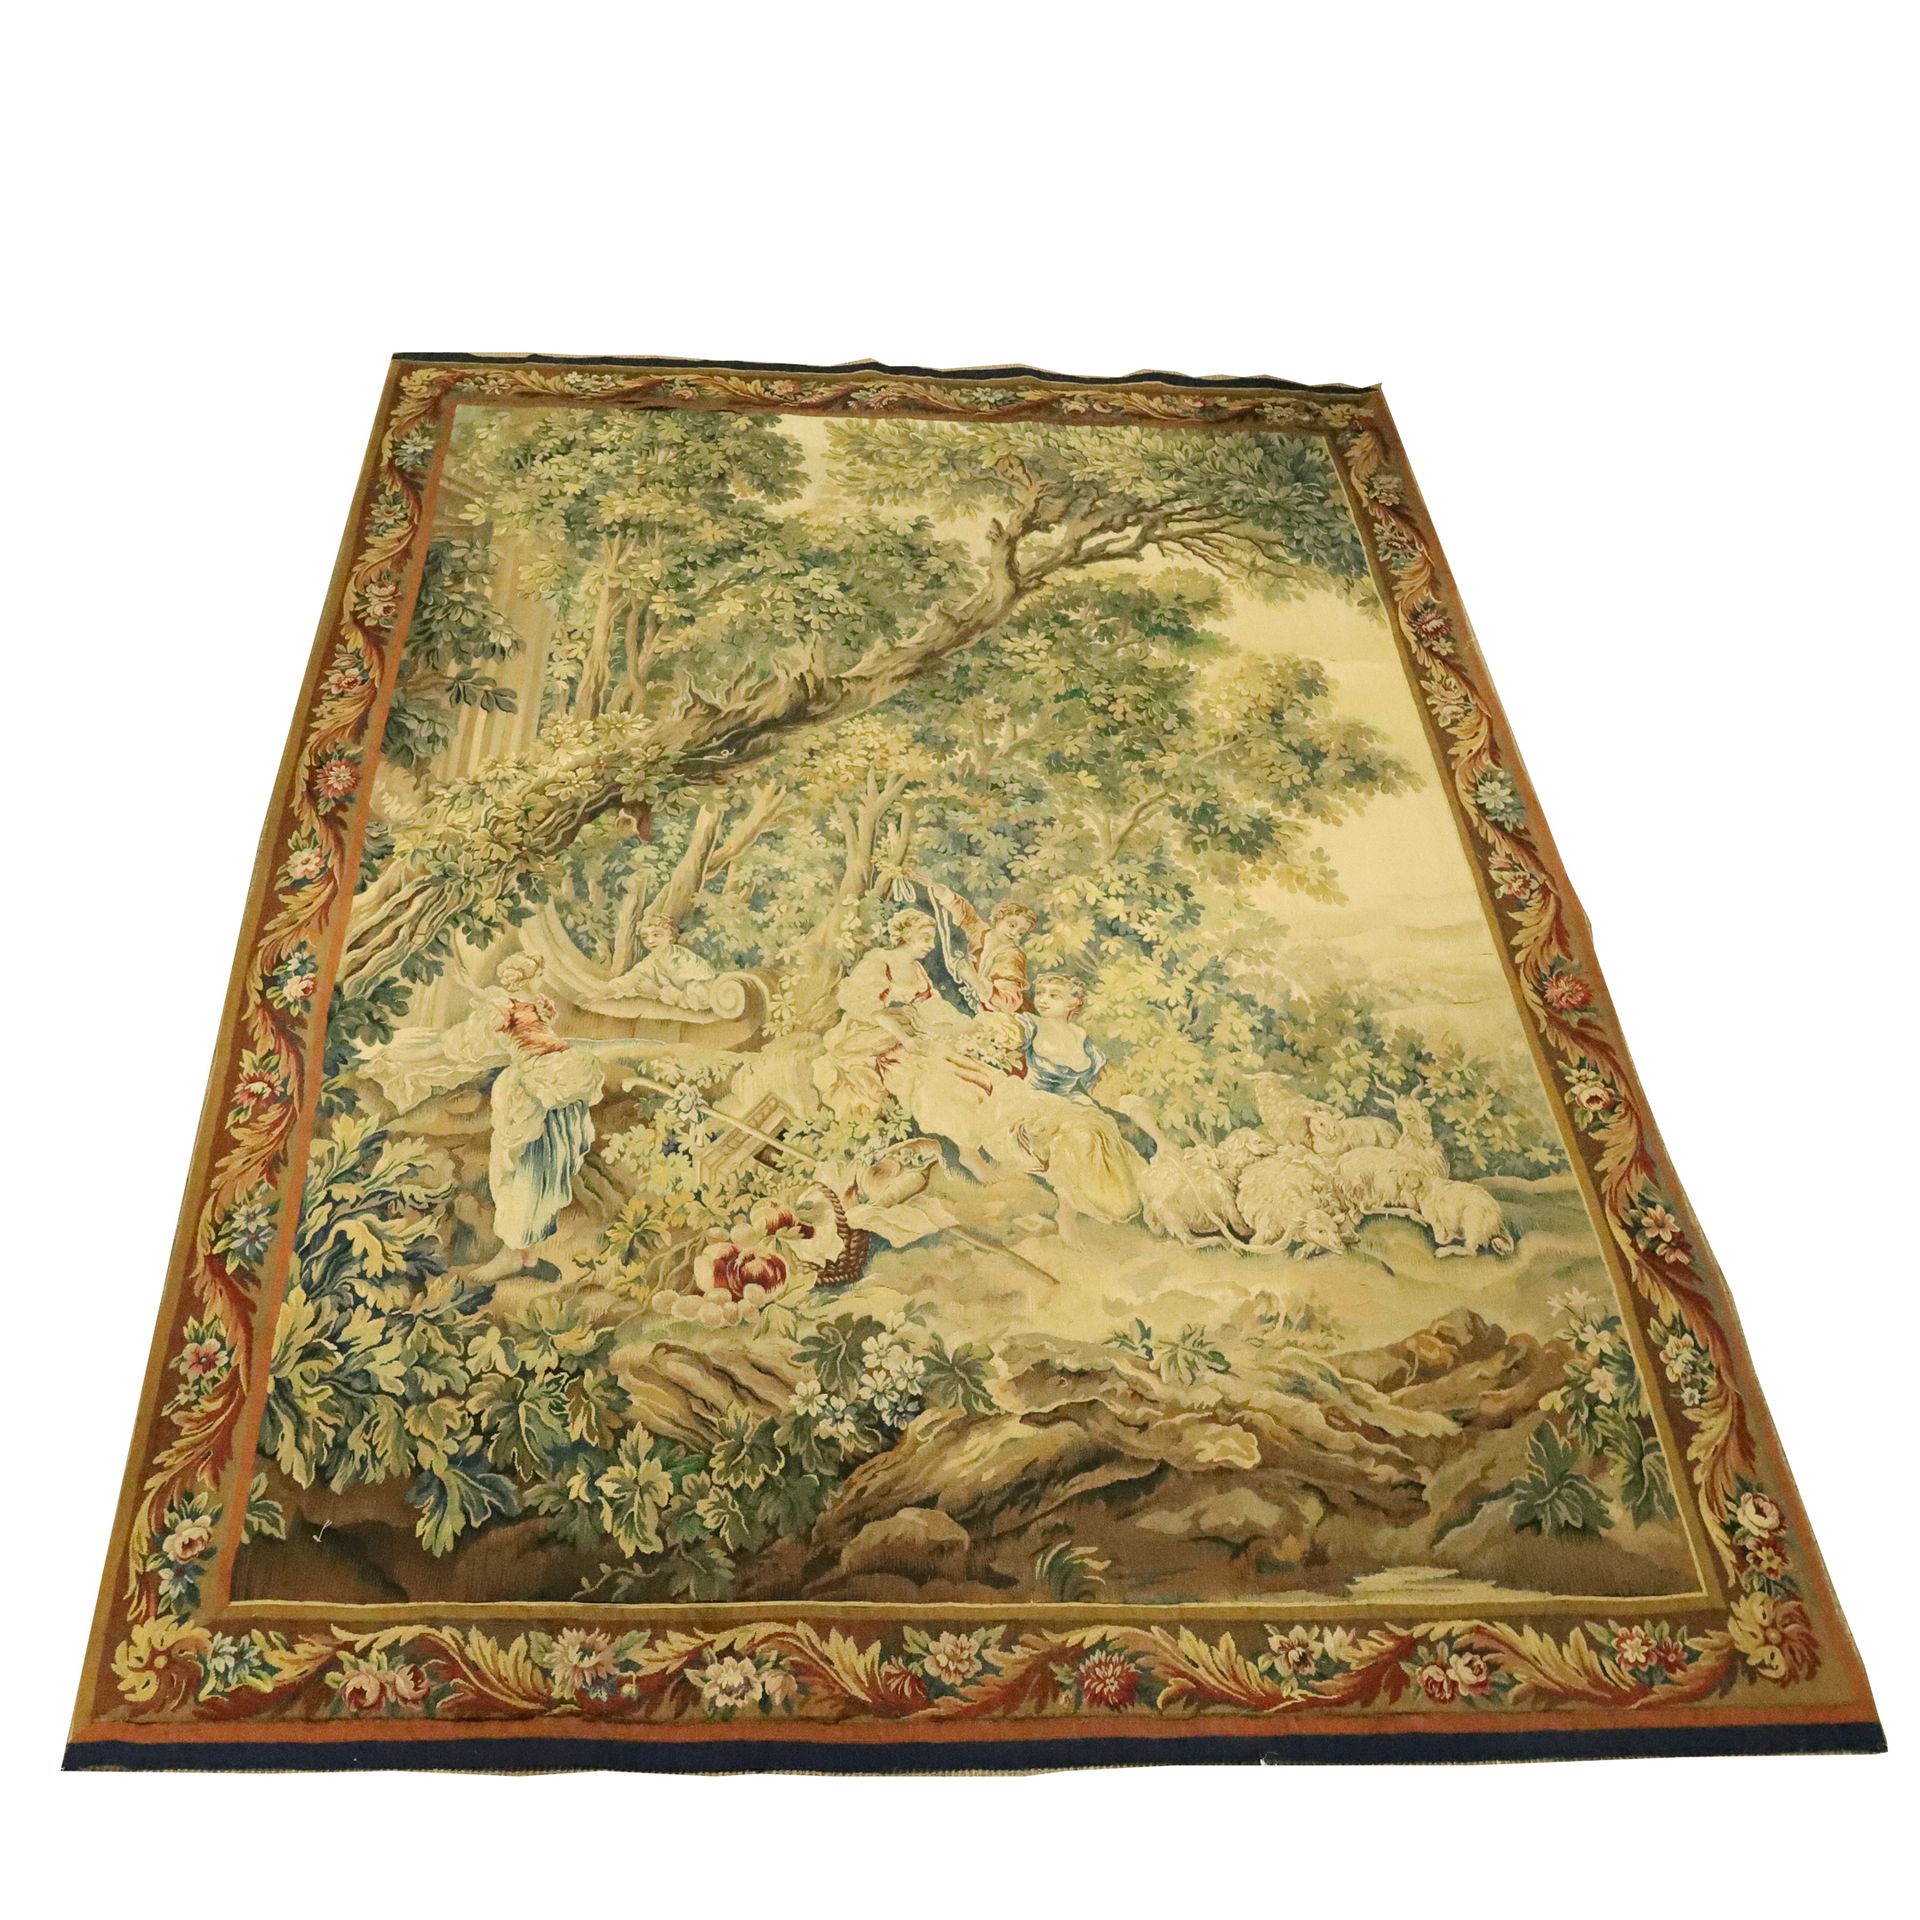 Null LARGE TAPESTRY OF AUBUSSON "SCENE GALANTE" IN WOOL

Decorated with a group &hellip;